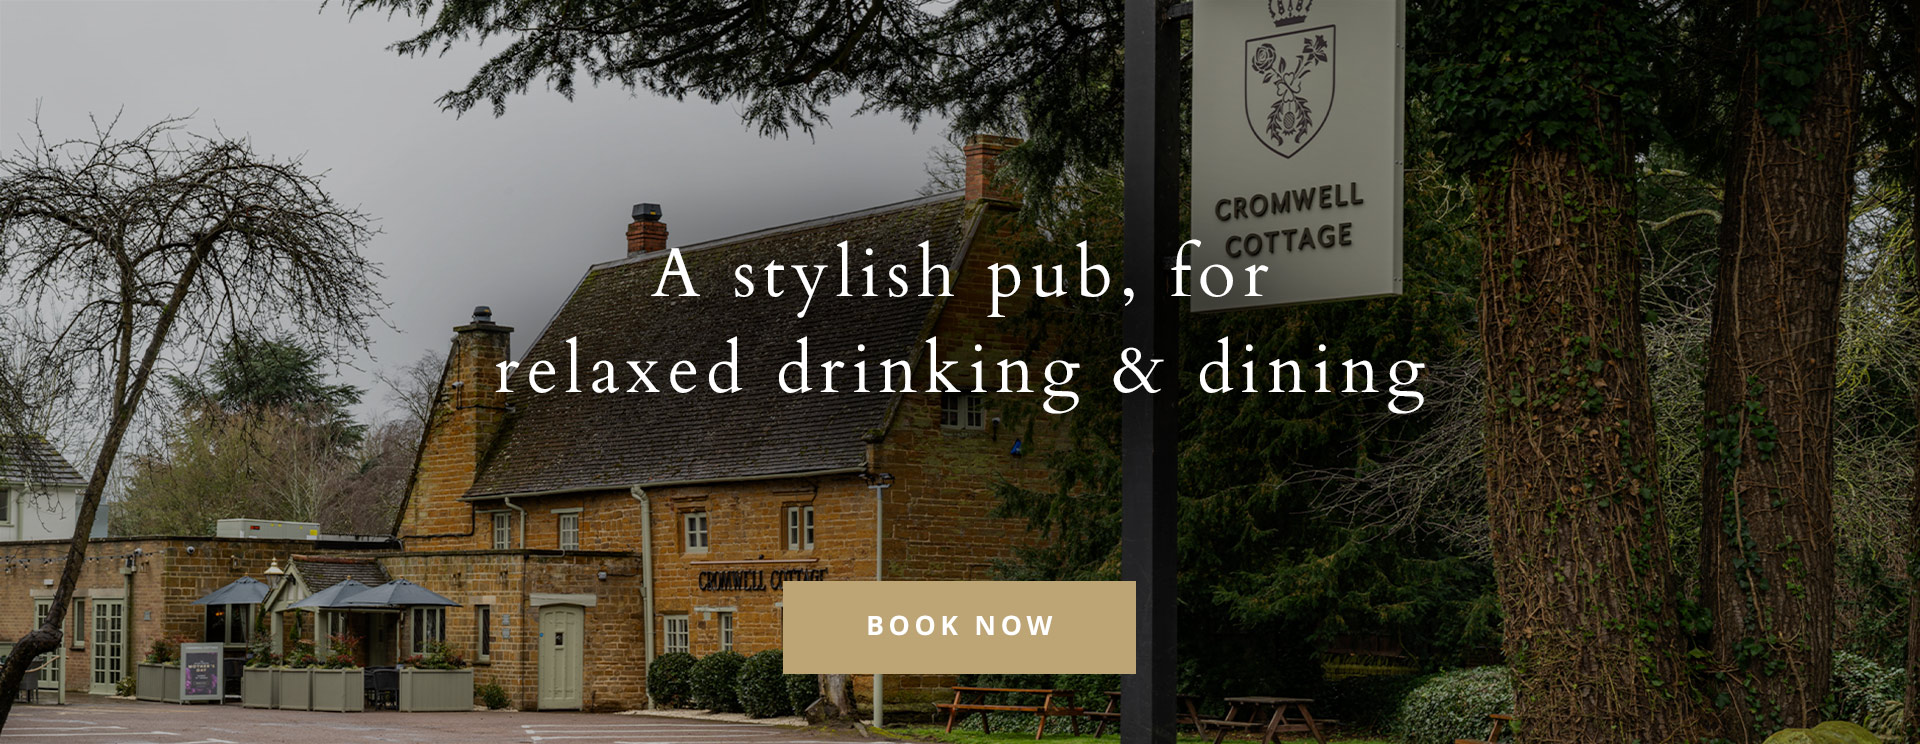 The Cromwell Cottage, a country pub in Northampton